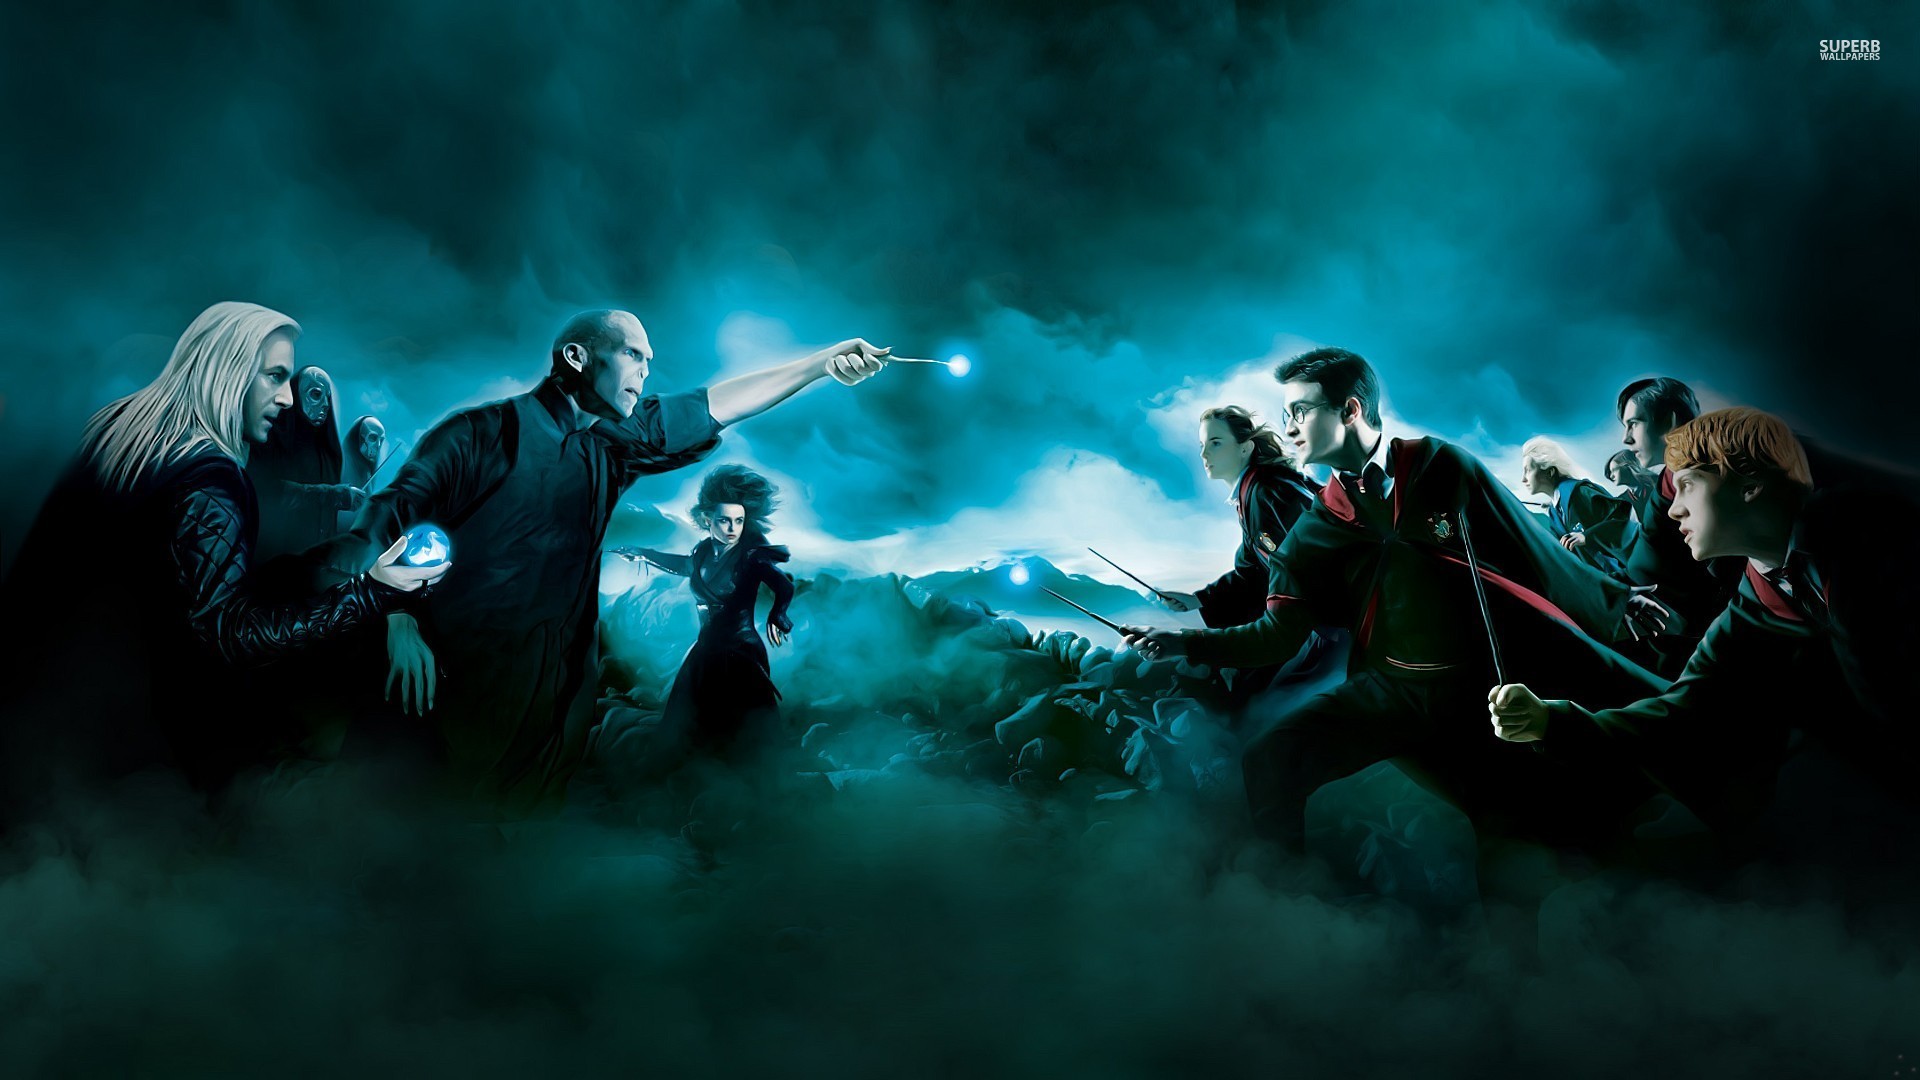 Harry Potter and the Deathly Hallows -Part 2 wallpaper - Movie ...